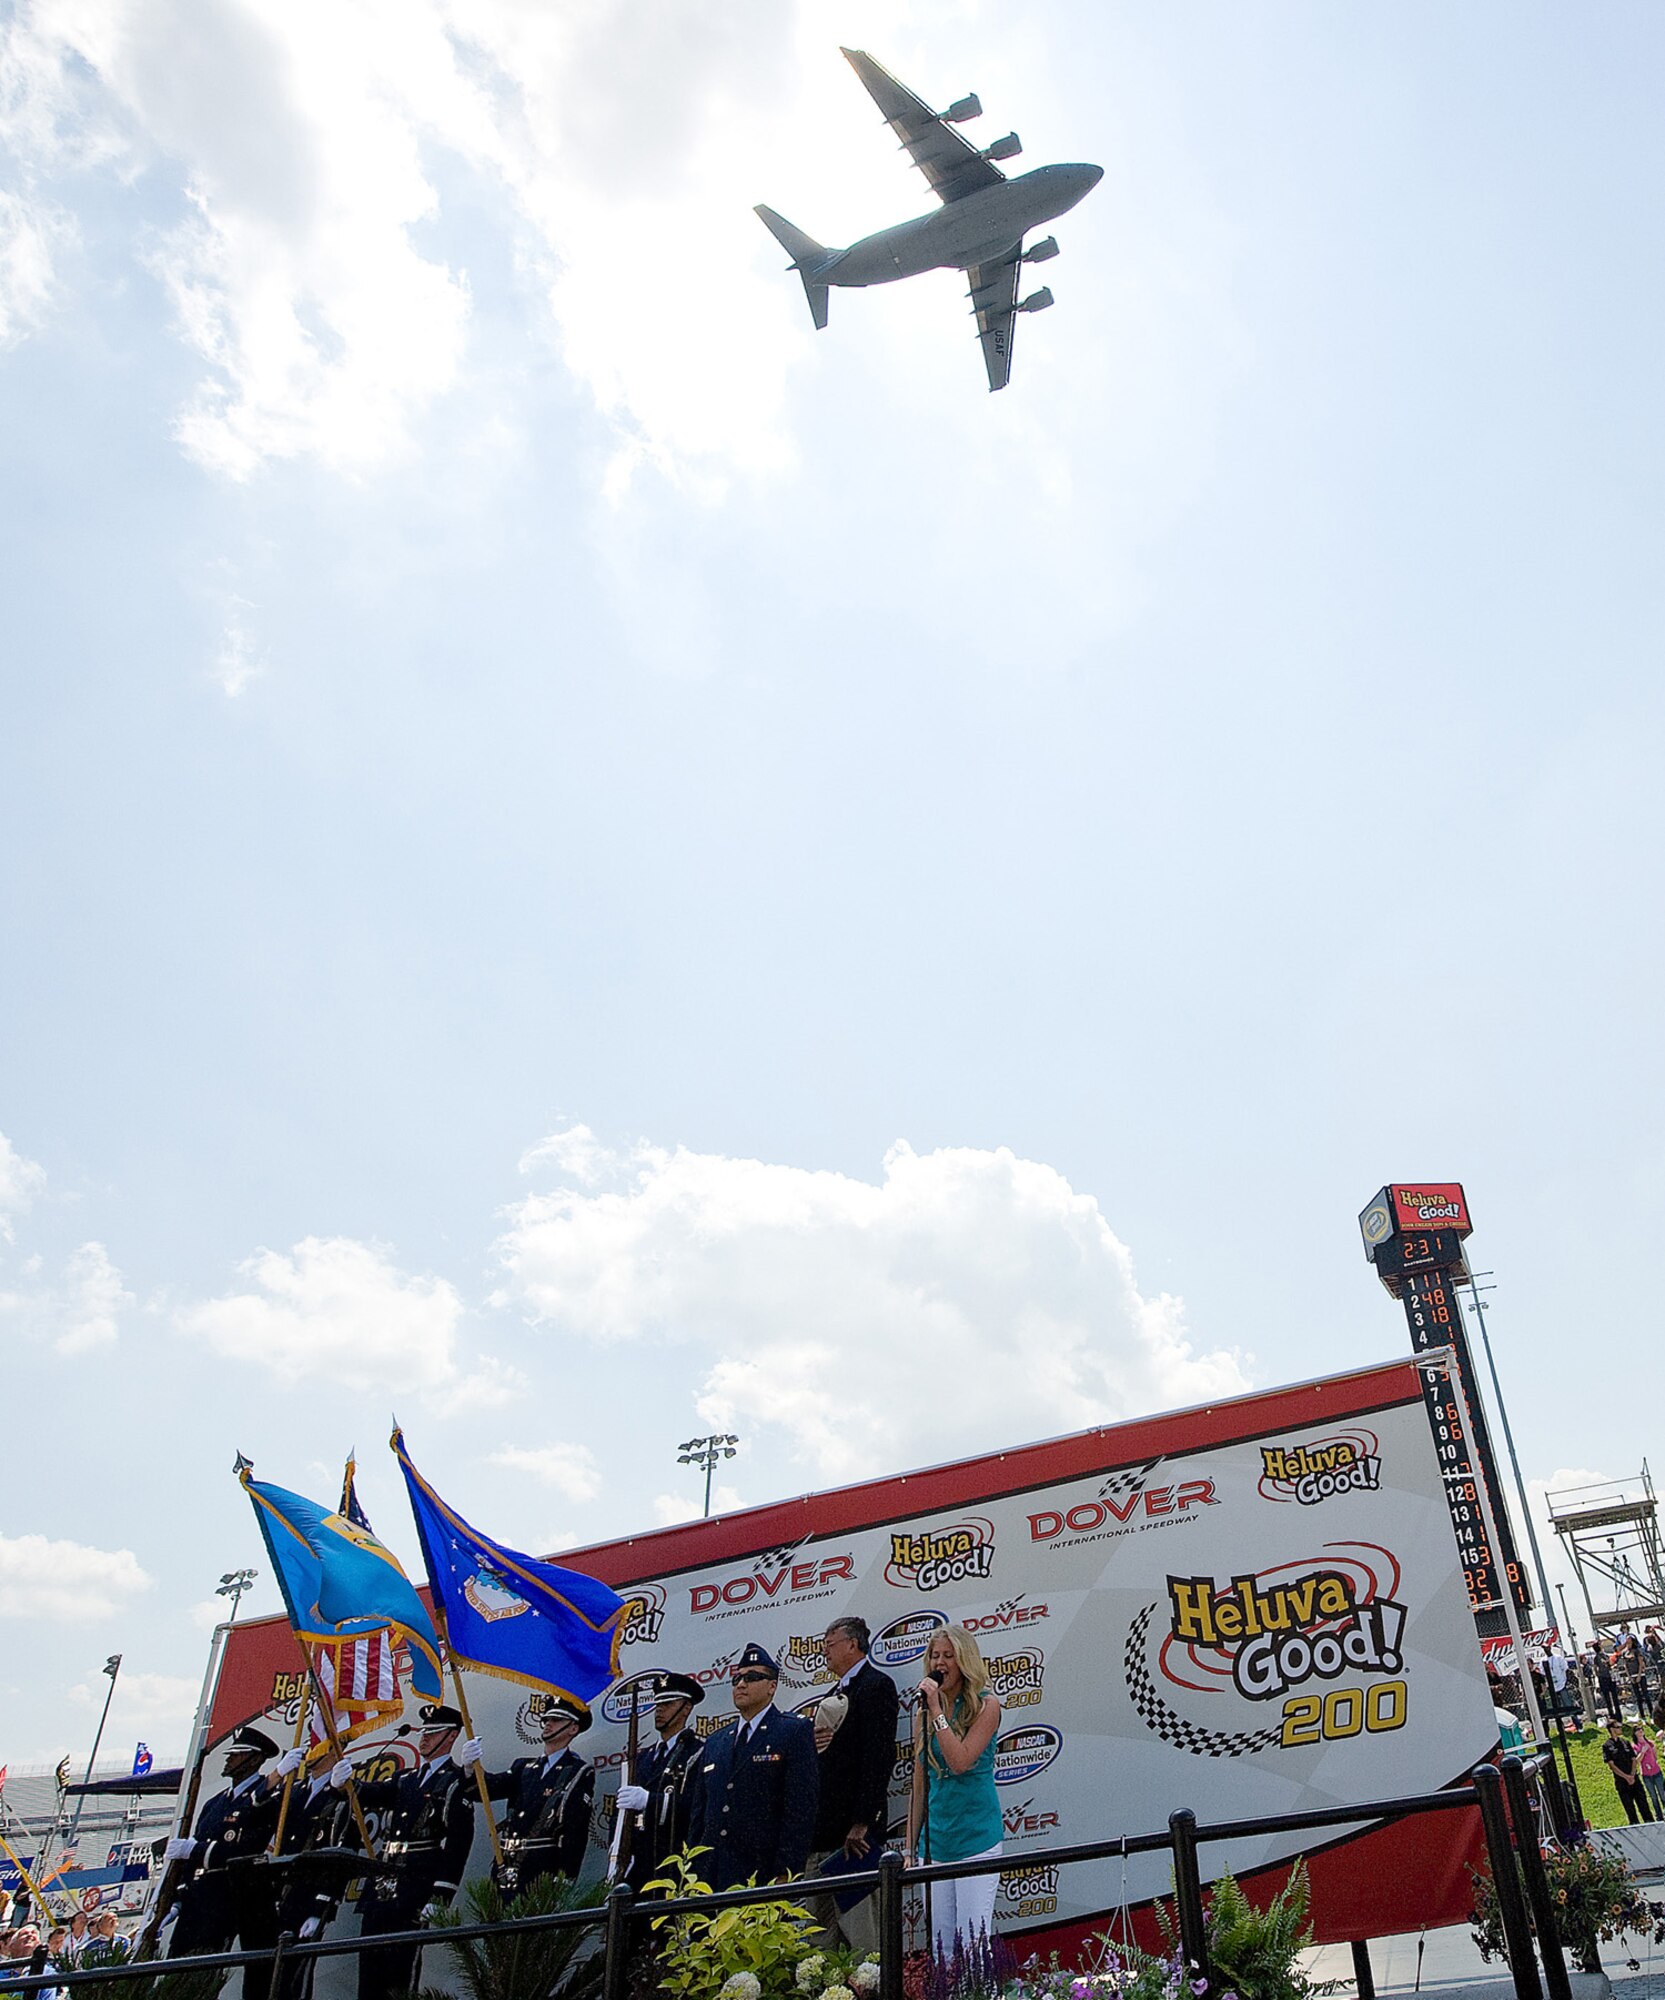 A C-17 Globemaster III aircrew, assigned to Dover Air Force Base, Del., performed a flyover as part of a pre-race ceremony at the Dover International Speedway May 30. Also pictured are members of the base's honor guard, which posted the colors in a stadium that seats 135,000. Over the weekend, reservists and regualr Air Force members from the 512th and 436th Airlift Wings participated in various events showcasing Air Force and AF Reserve capabilities. (Air Force photo/Jason Minto)